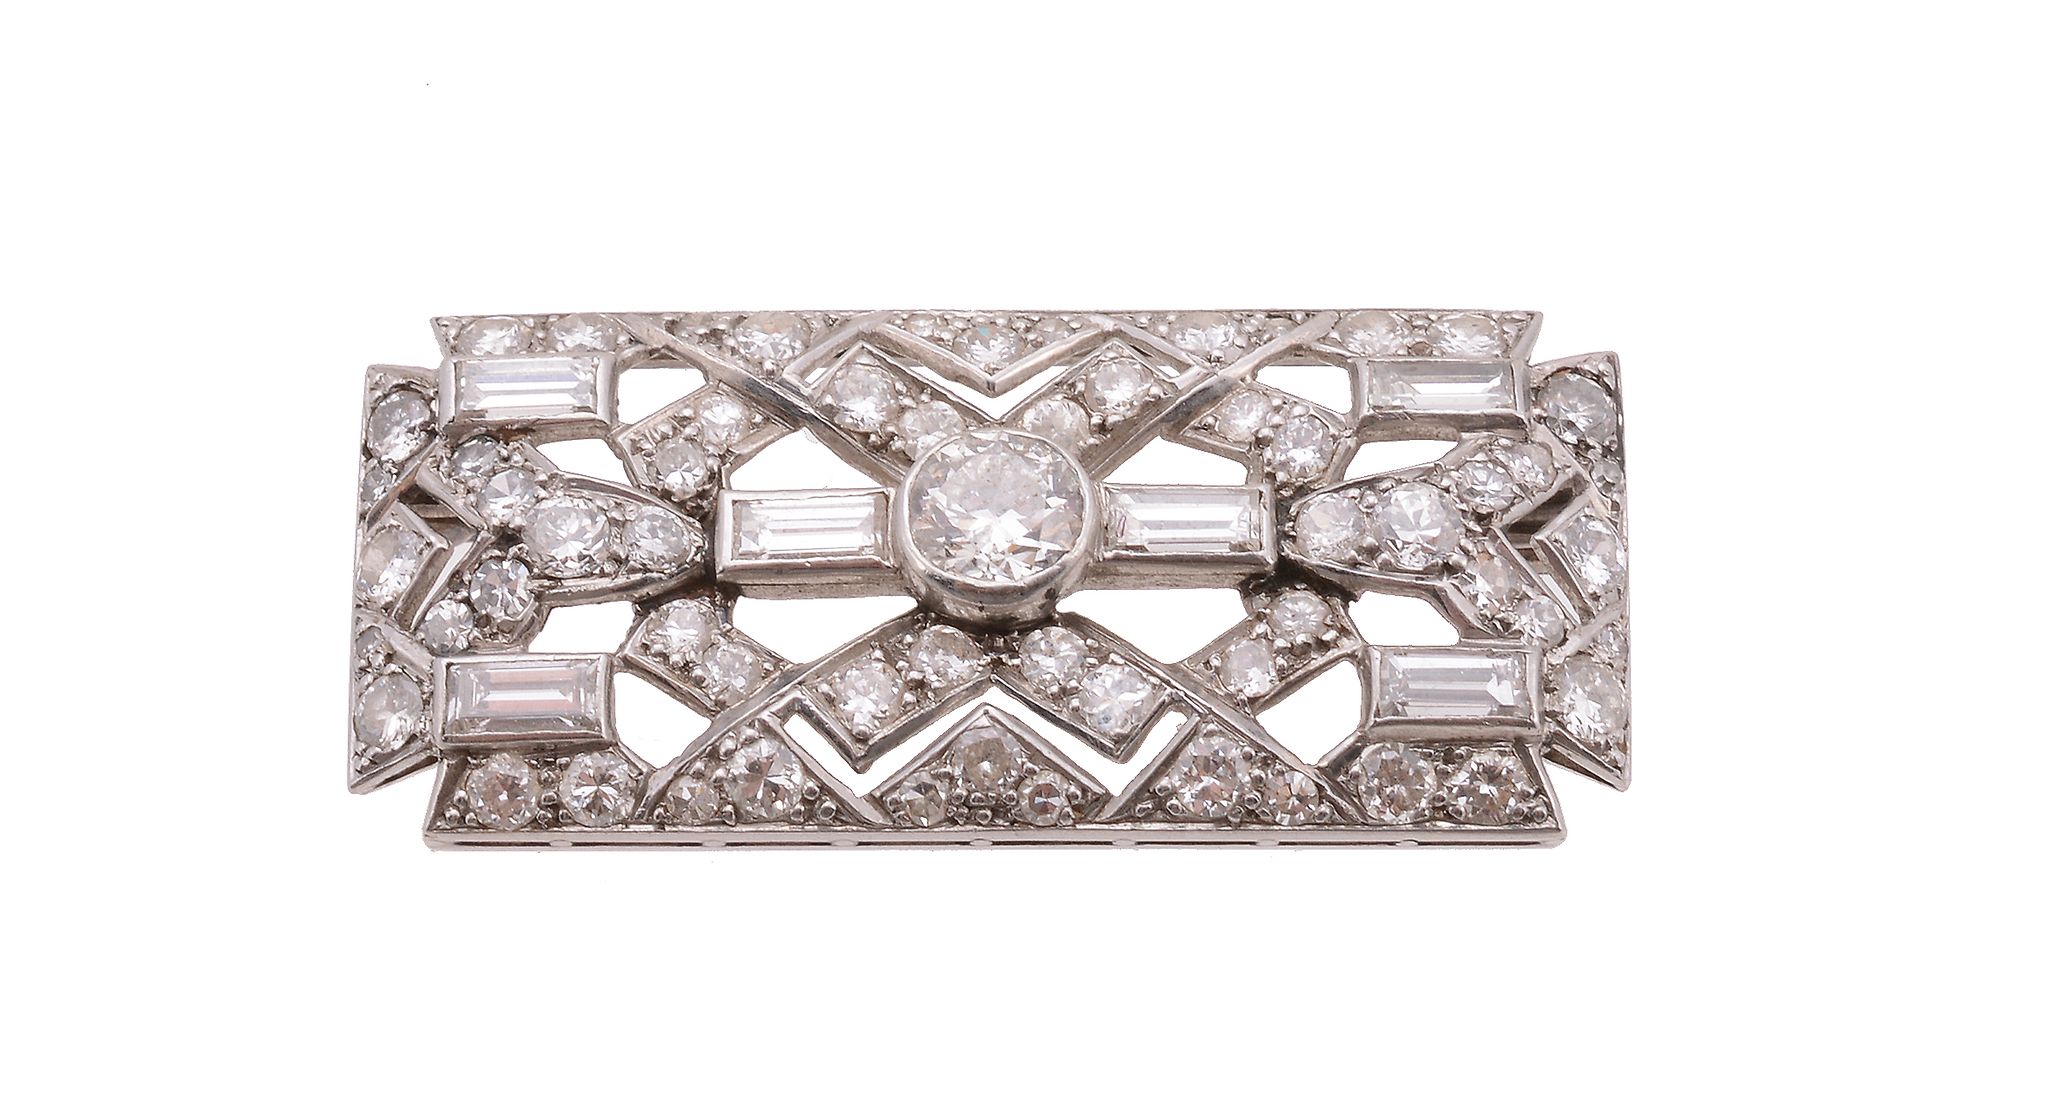 An Art Deco diamond brooch, circa 1930, the pierced rectangular panel set with old brilliant and - Image 2 of 2